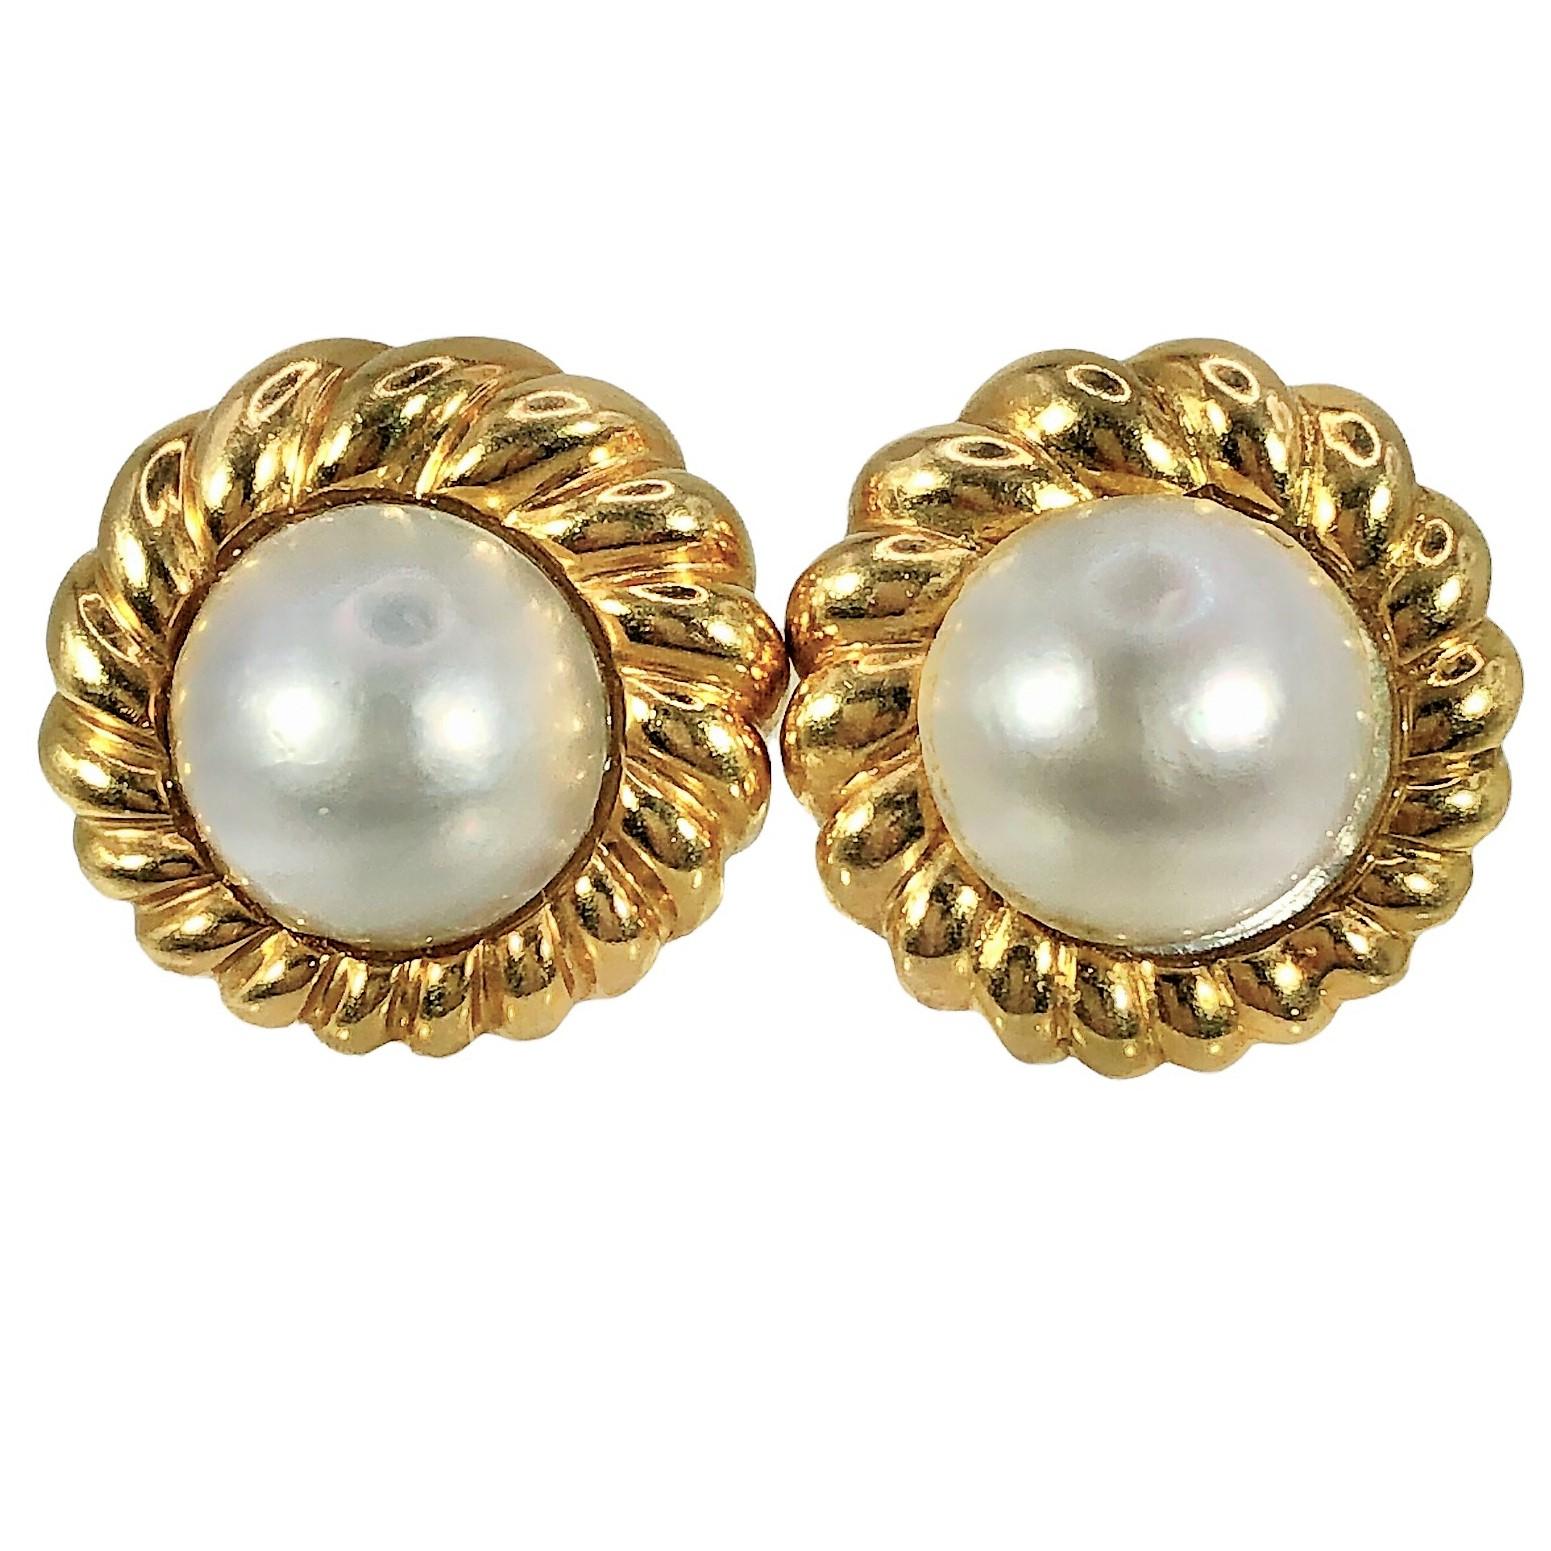 This traditional pair of Tiffany & Co. 18K gold and Mabe pearl earrings are truly classic and tasteful. The Light Cream Rose color Mabe Pearl centers are surrounded by a  bold, rope border. Measures a maximum diameter of 7/8 inch. Equipped with